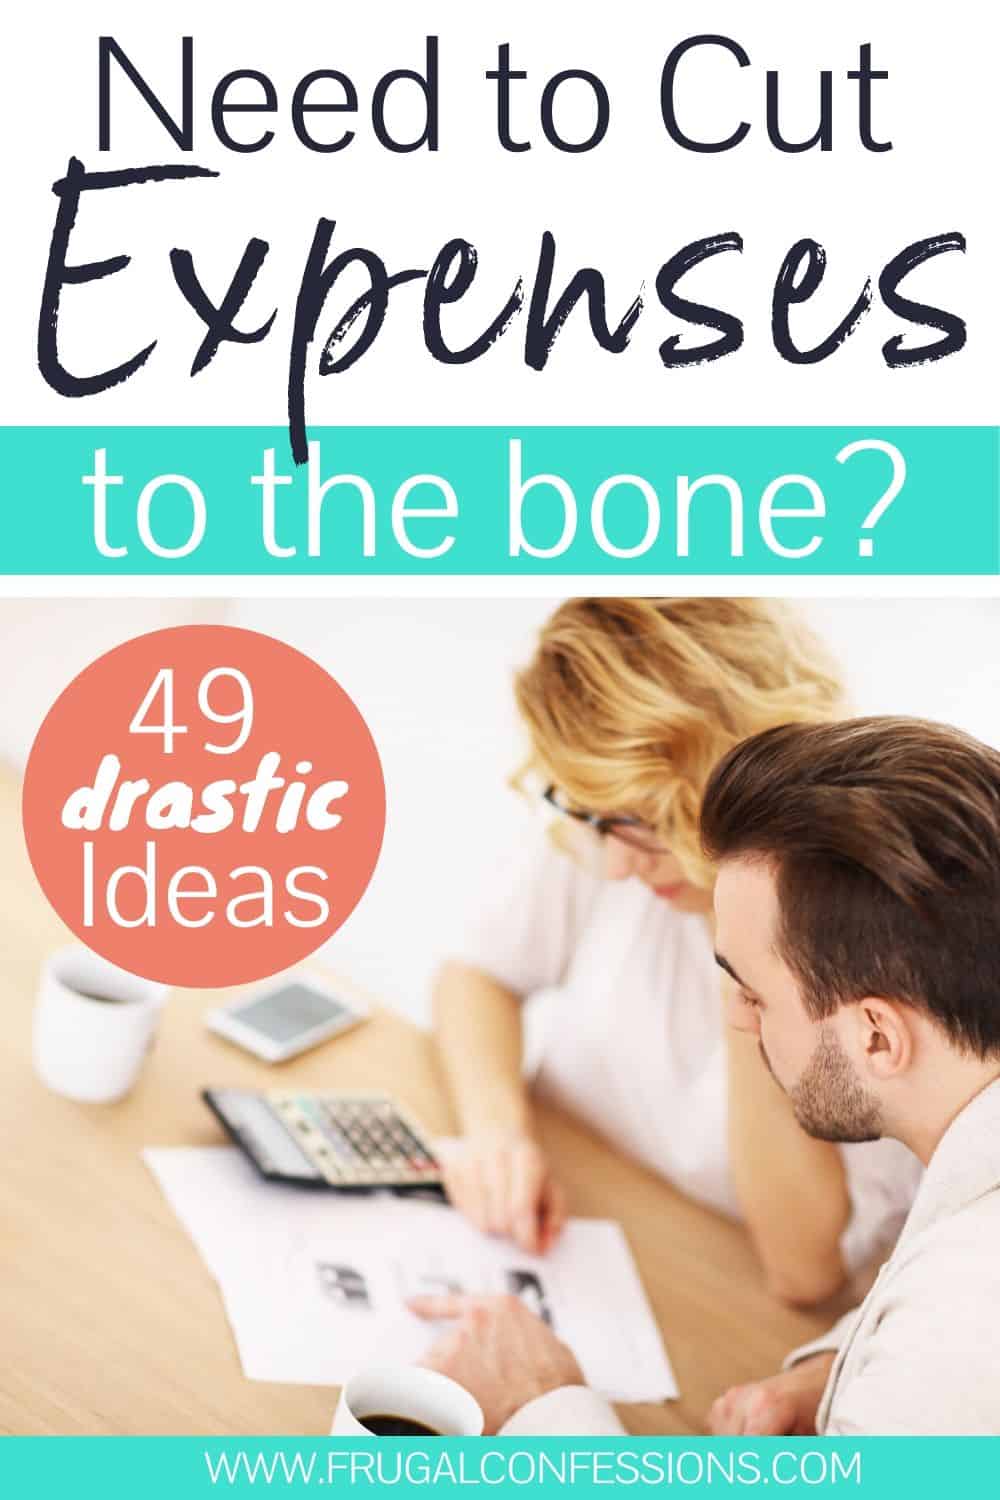 couple working on finances at table, text overlay "need to cut expenses to the bone? 49 drastic ideas"